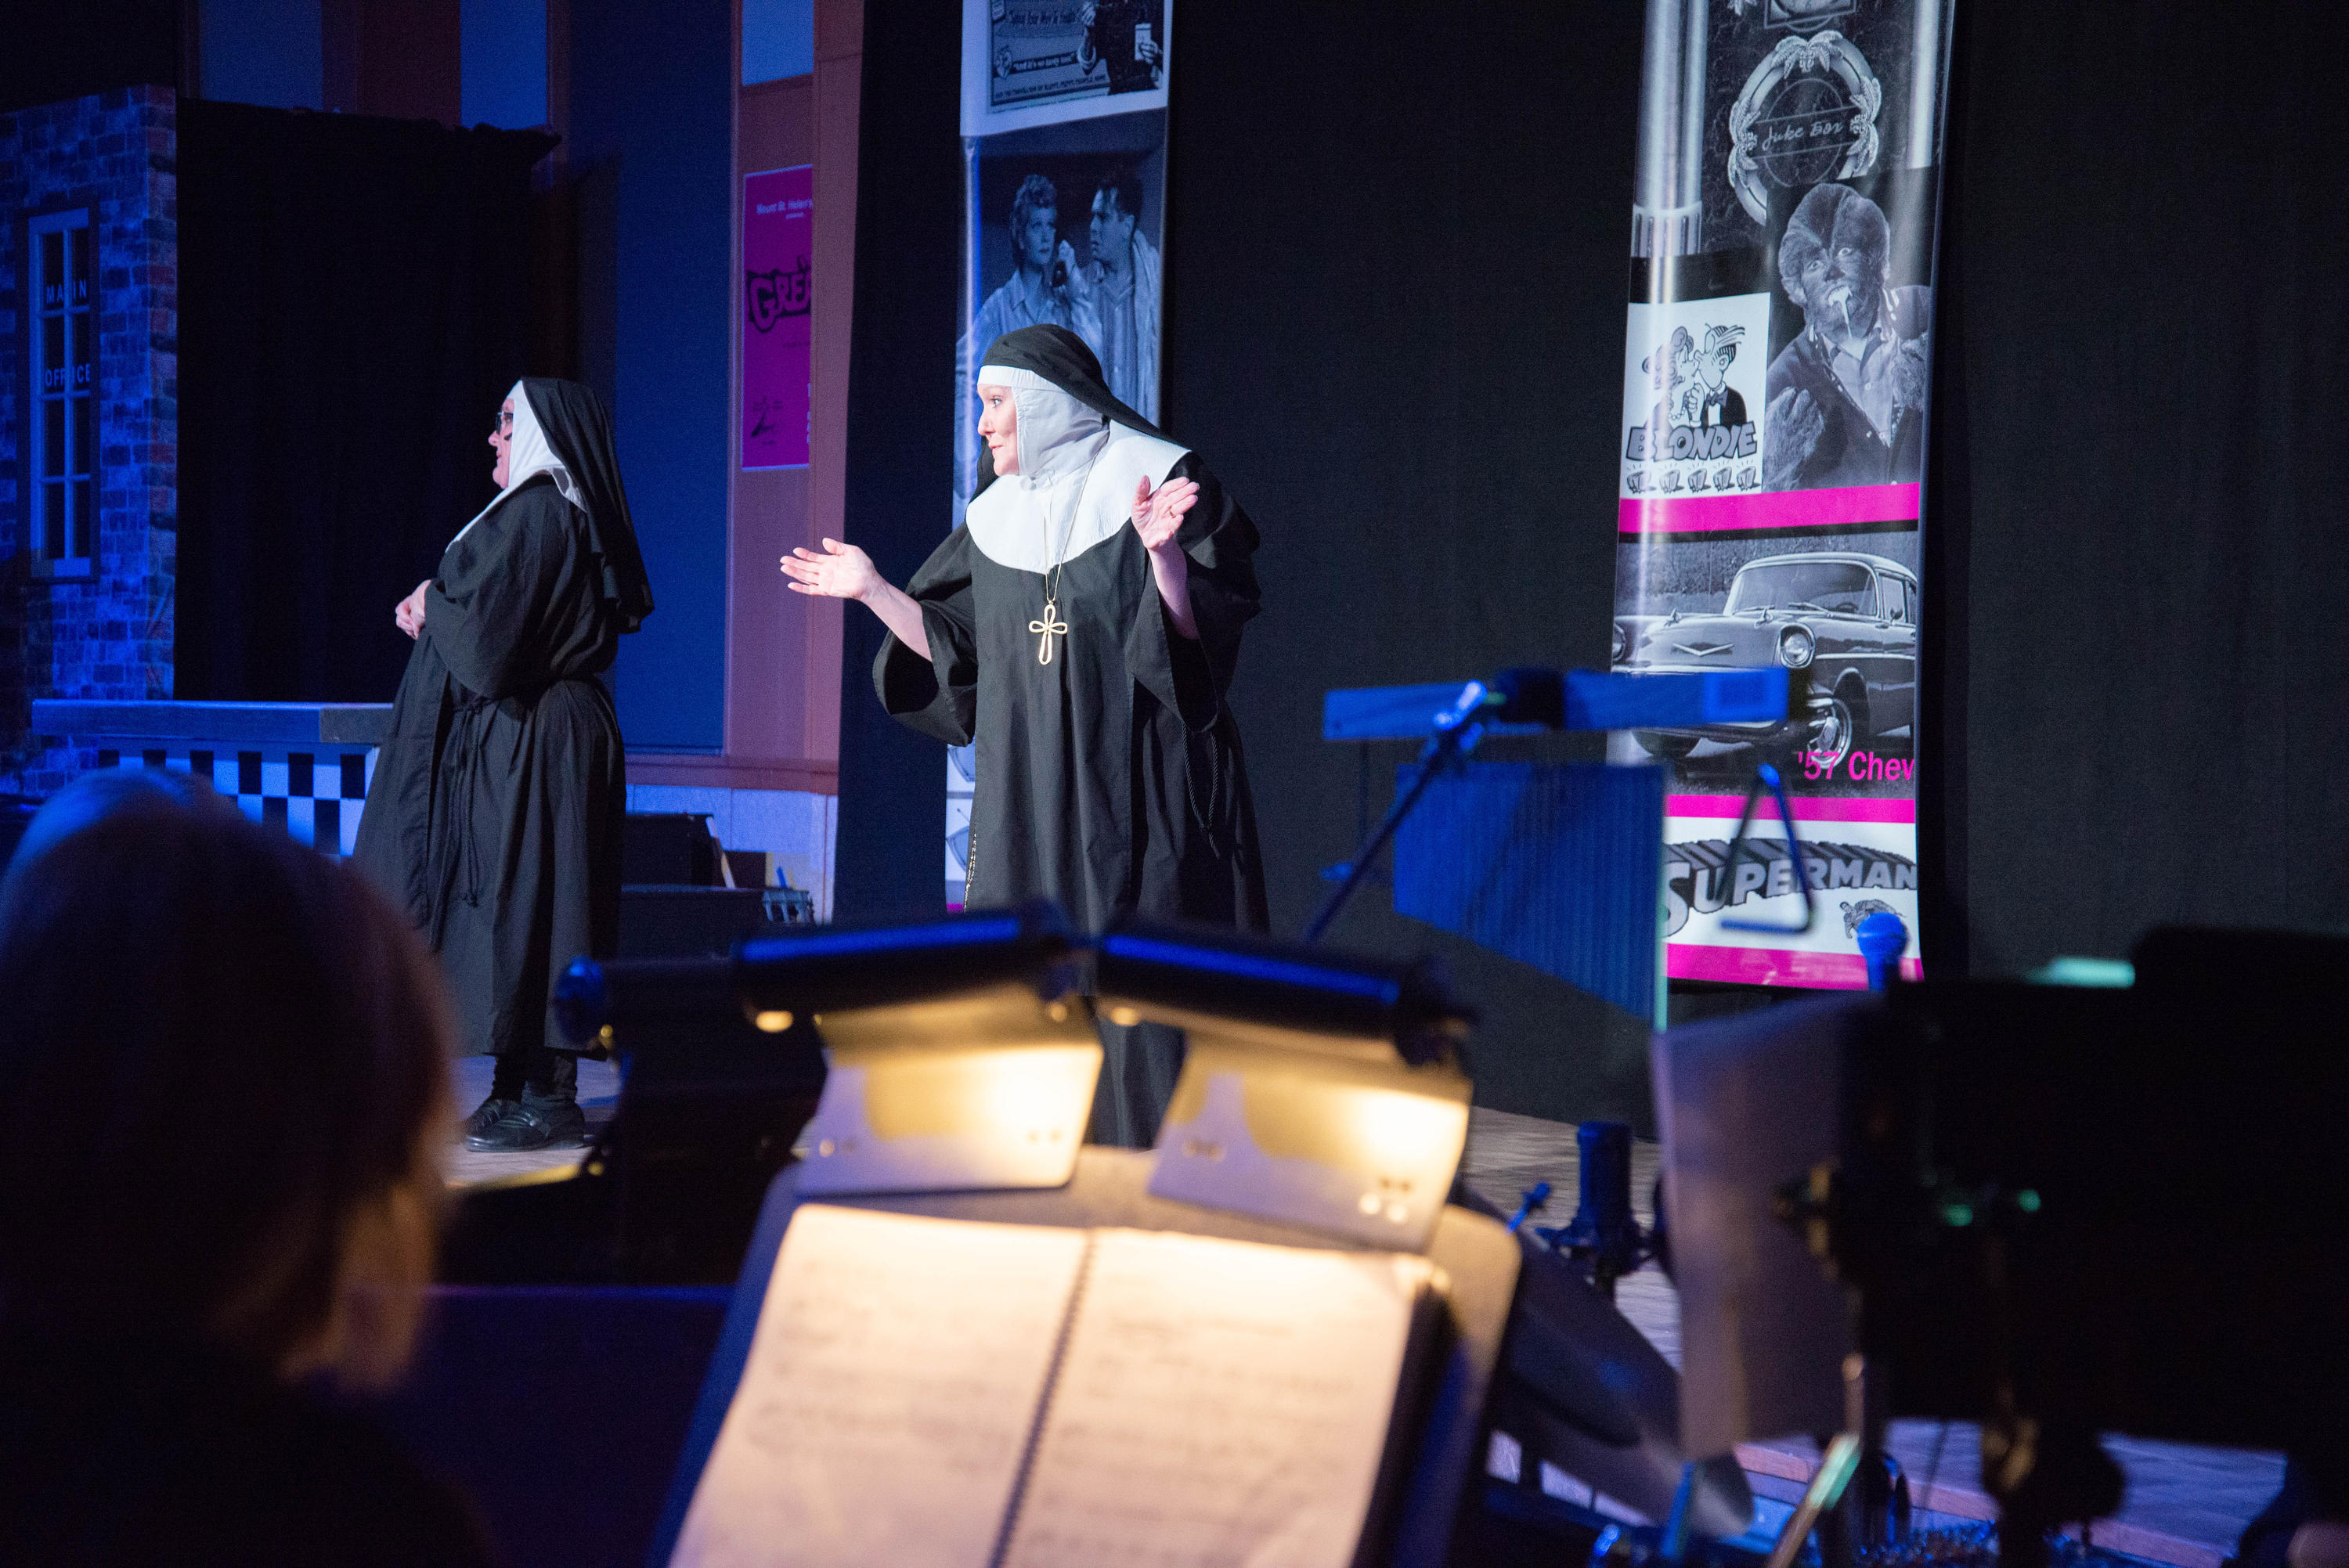 A nun sings on stage with a musician in the foreground